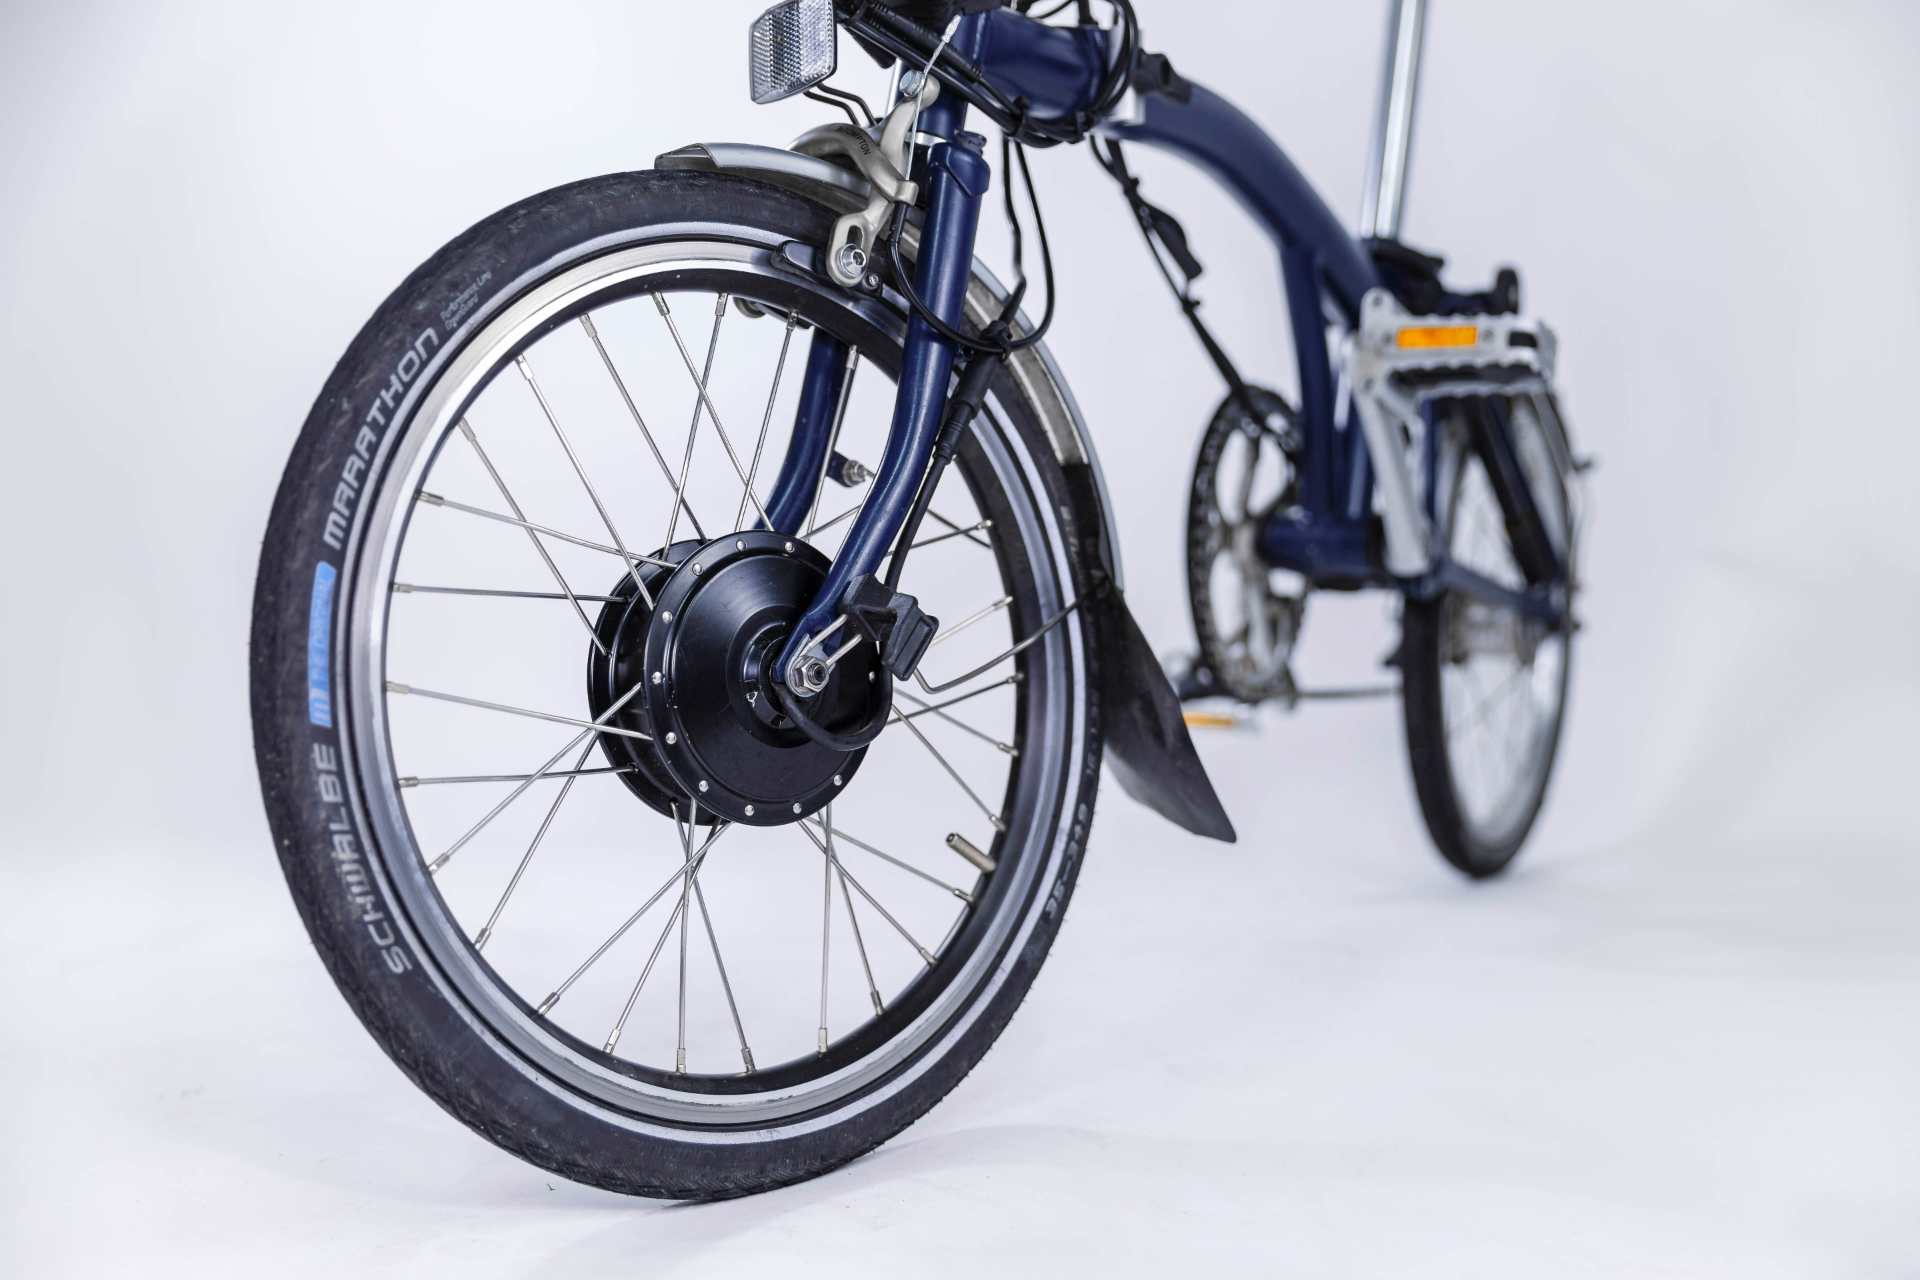 compact swytch kit converts any bike to an e for sustainable transport 5